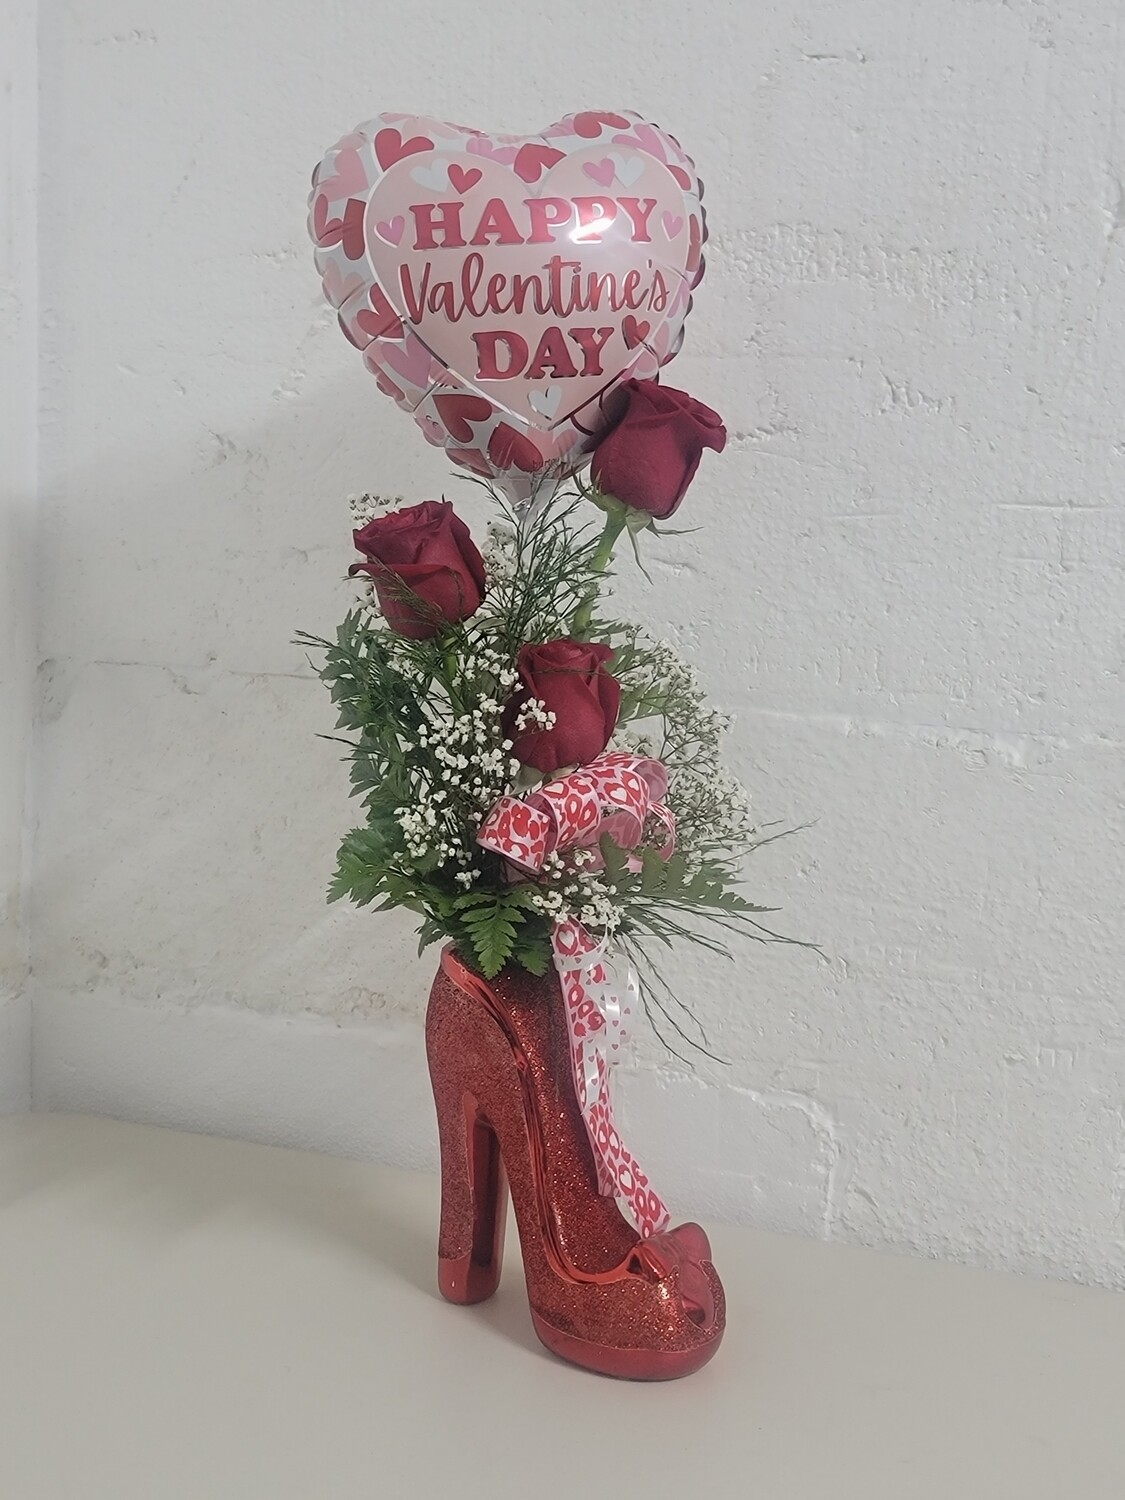 3 roses and a balloon in a shoe vase